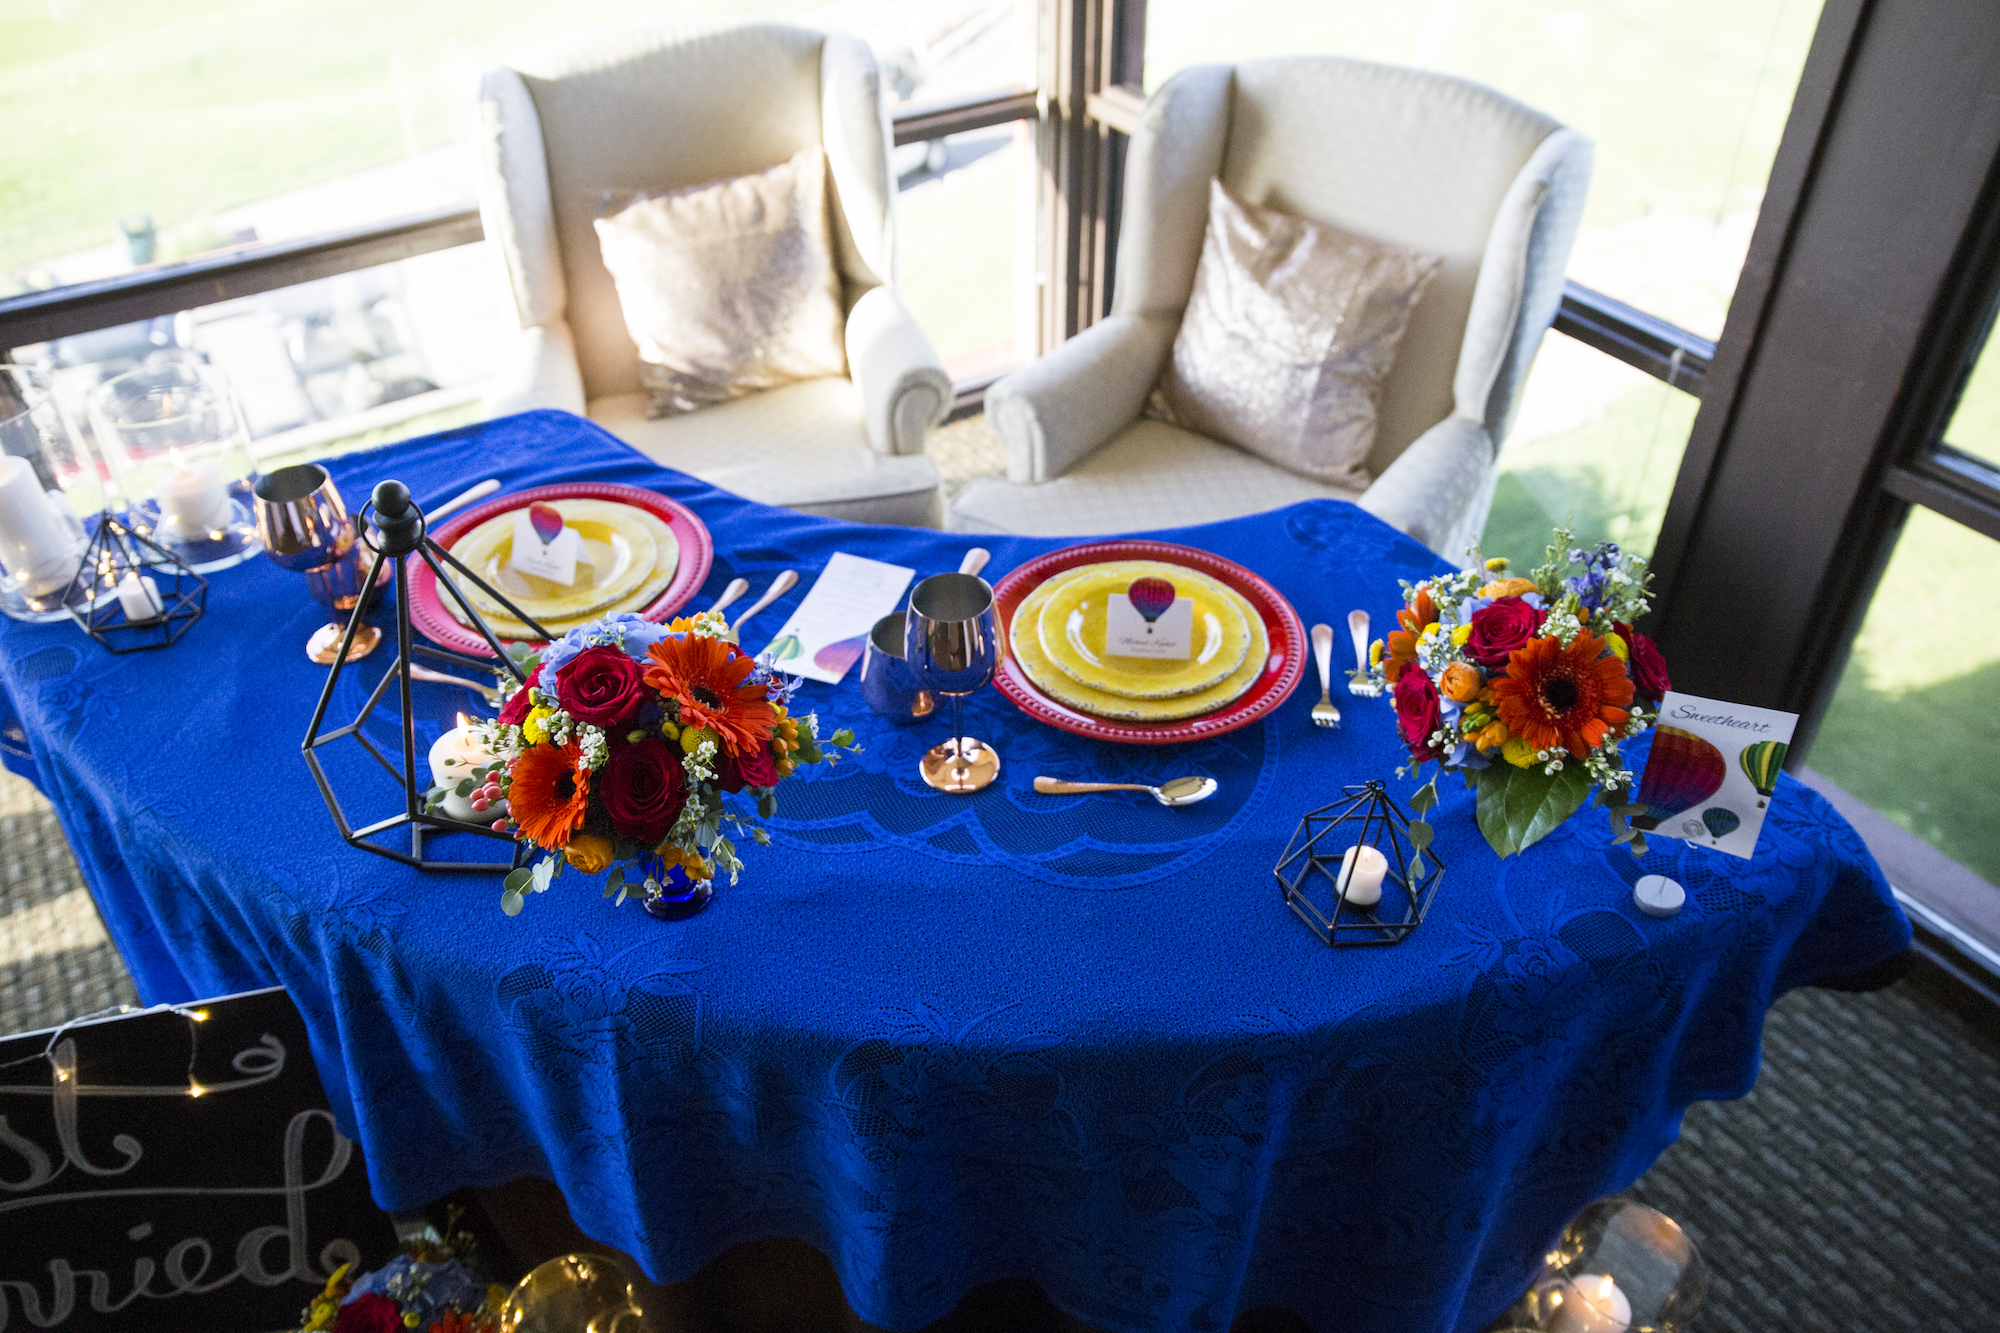 wedding planning design decor inspo real local New Mexico Perfect Wedding Guide couple bright color blue orange red hot air balloon love venue decor tablescape design sunflowers floral arrangement details indoor photography professional